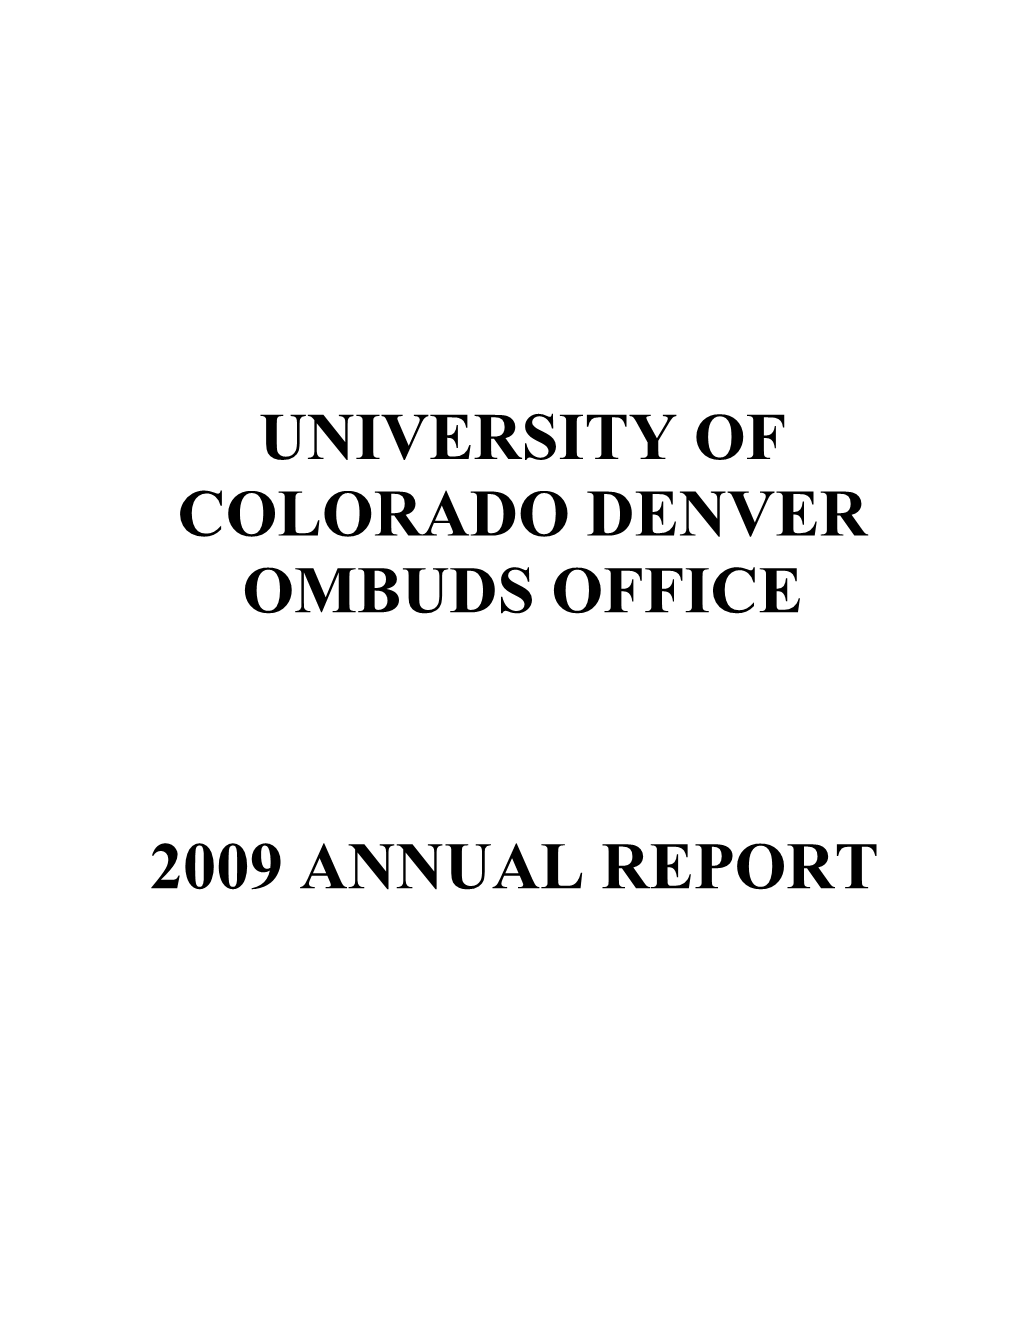 2008 Annual Report for The